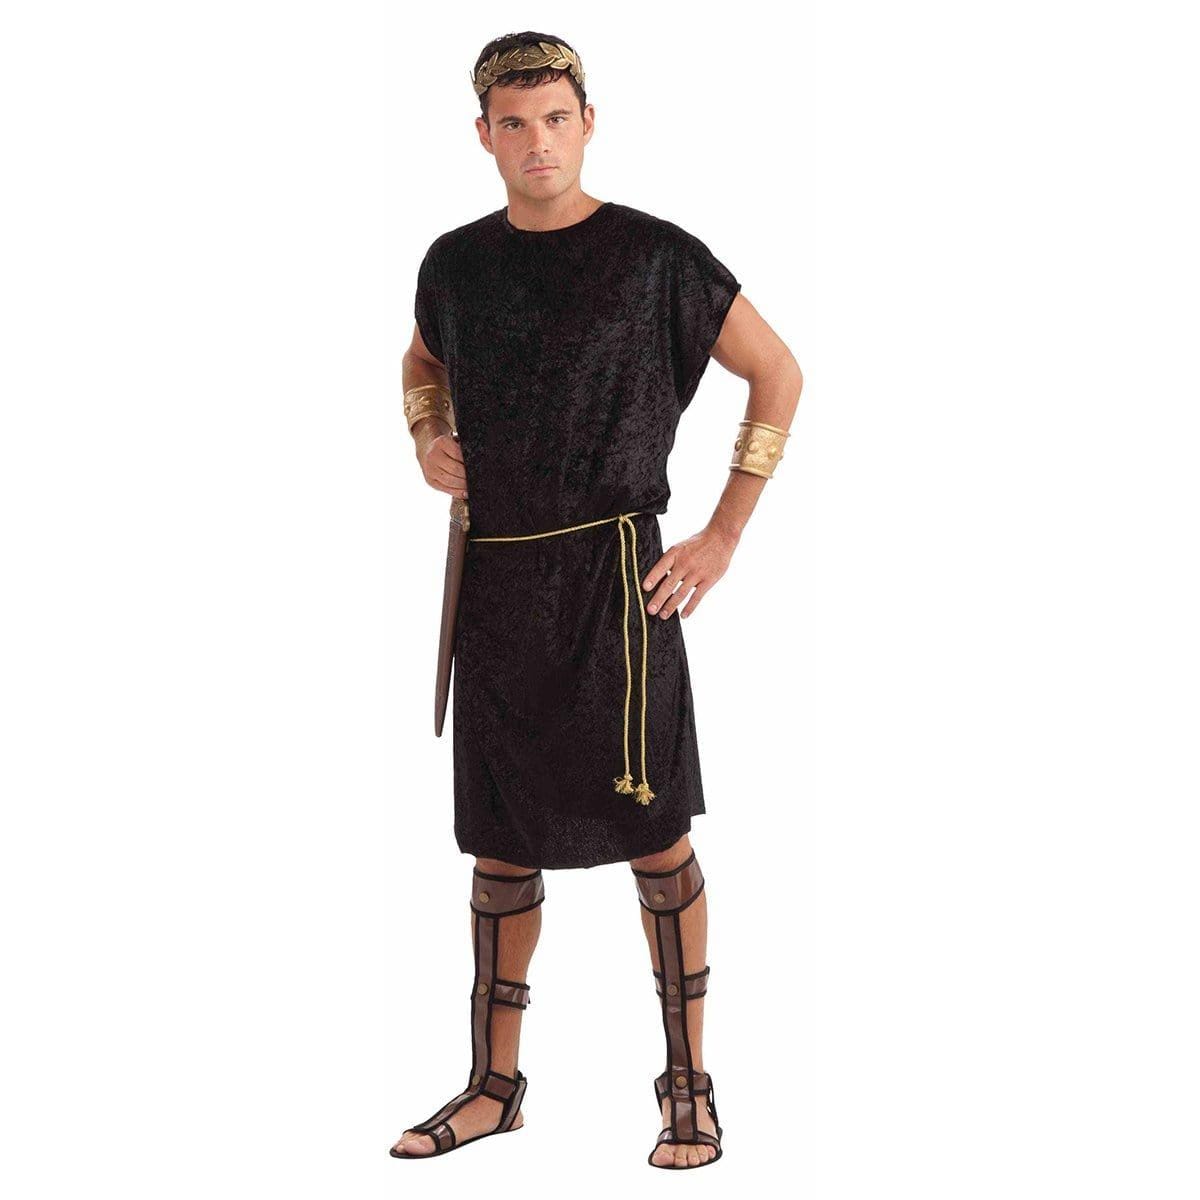 Buy Costume Accessories Black roman tunic for men sold at Party Expert